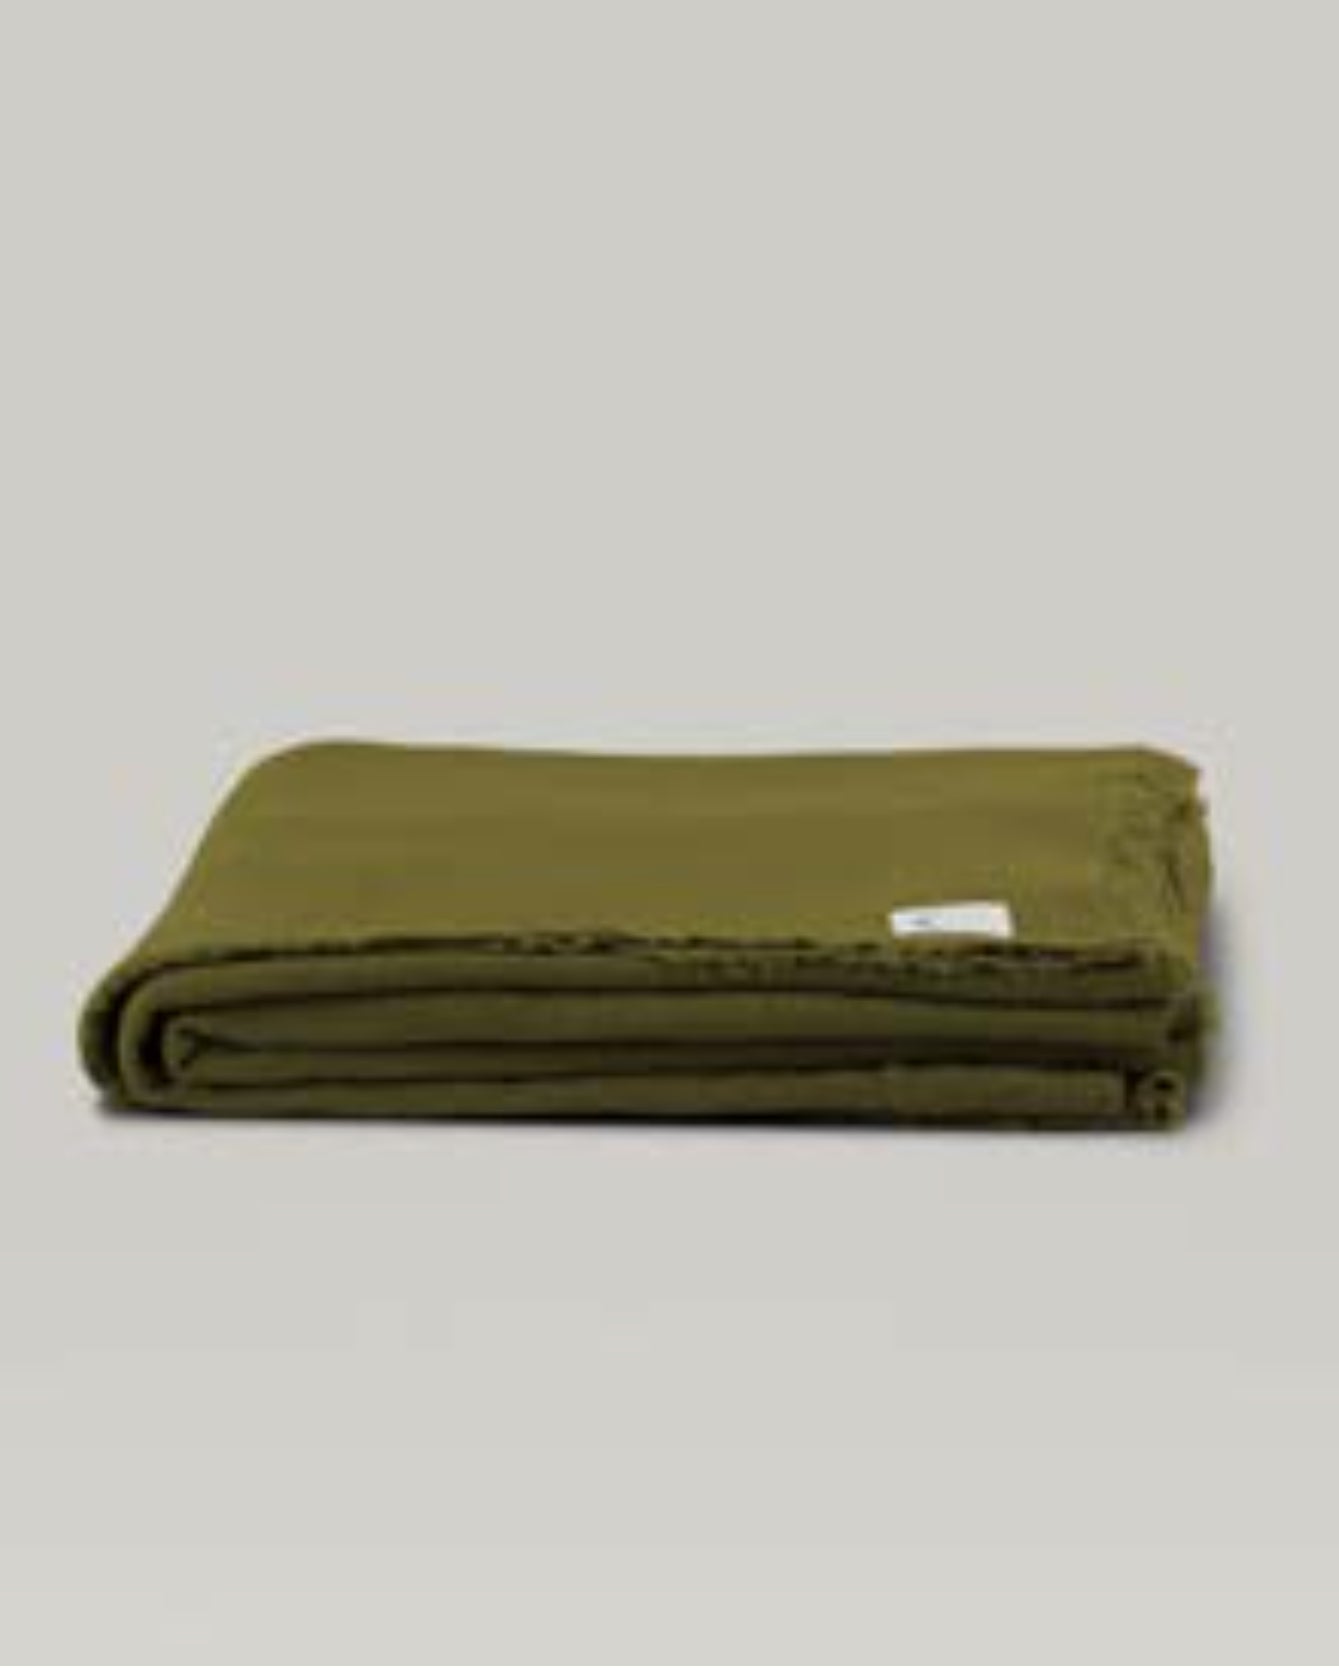 Tablecloth / Plaid / Bedspread in raw linen, Chartreuse 